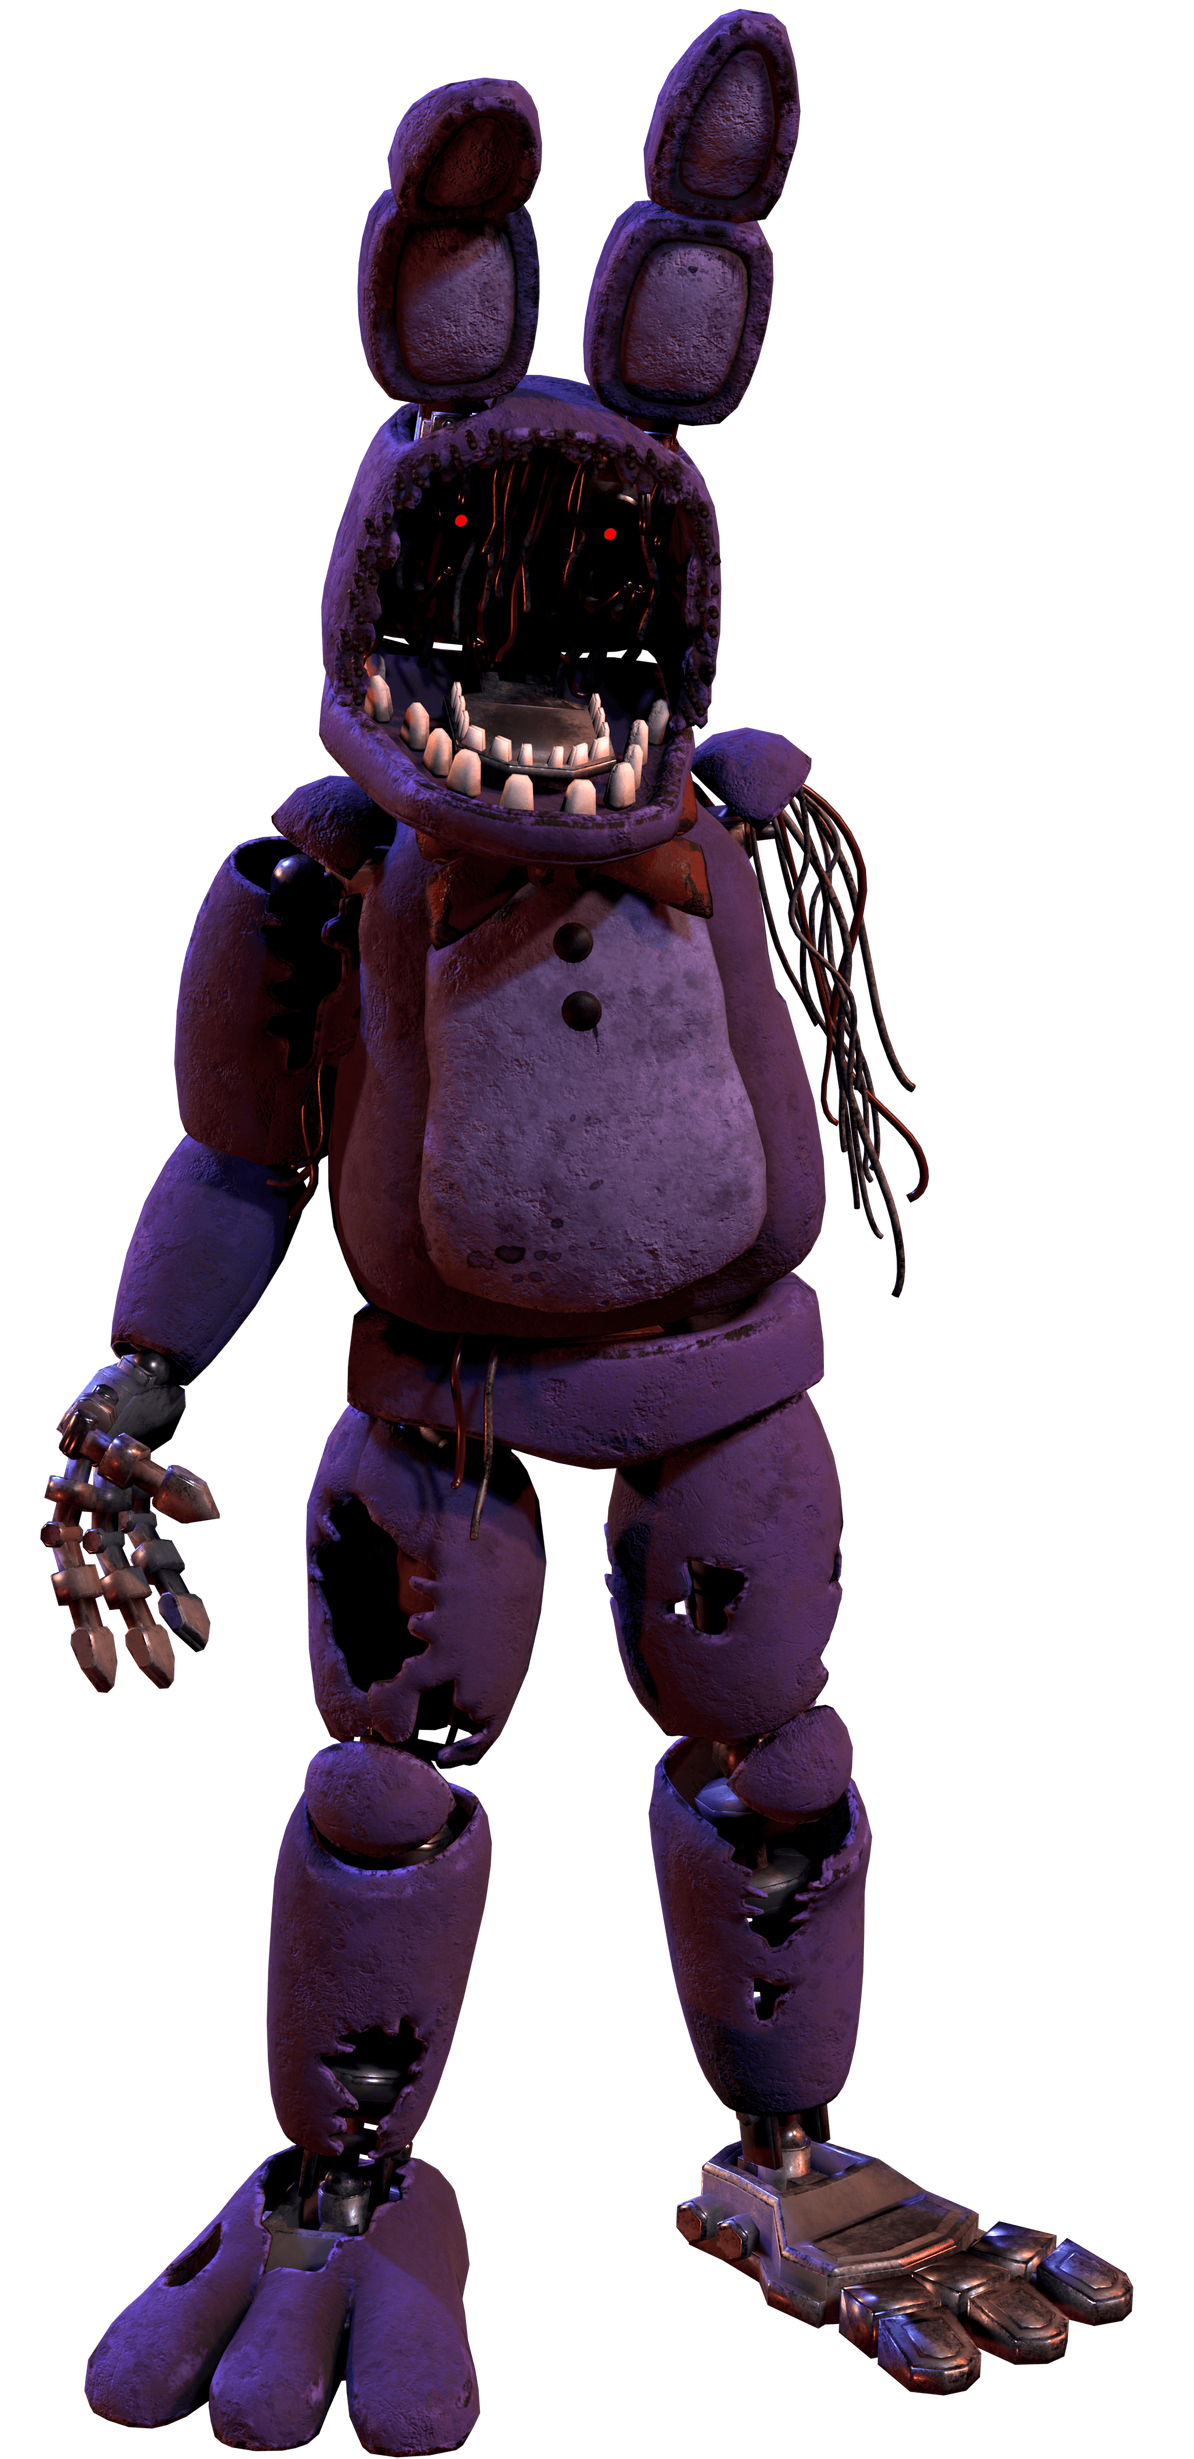 Is Withered Bonnie set to appear in the upcoming Five Nights at Freddy, Bonnie Fnaf